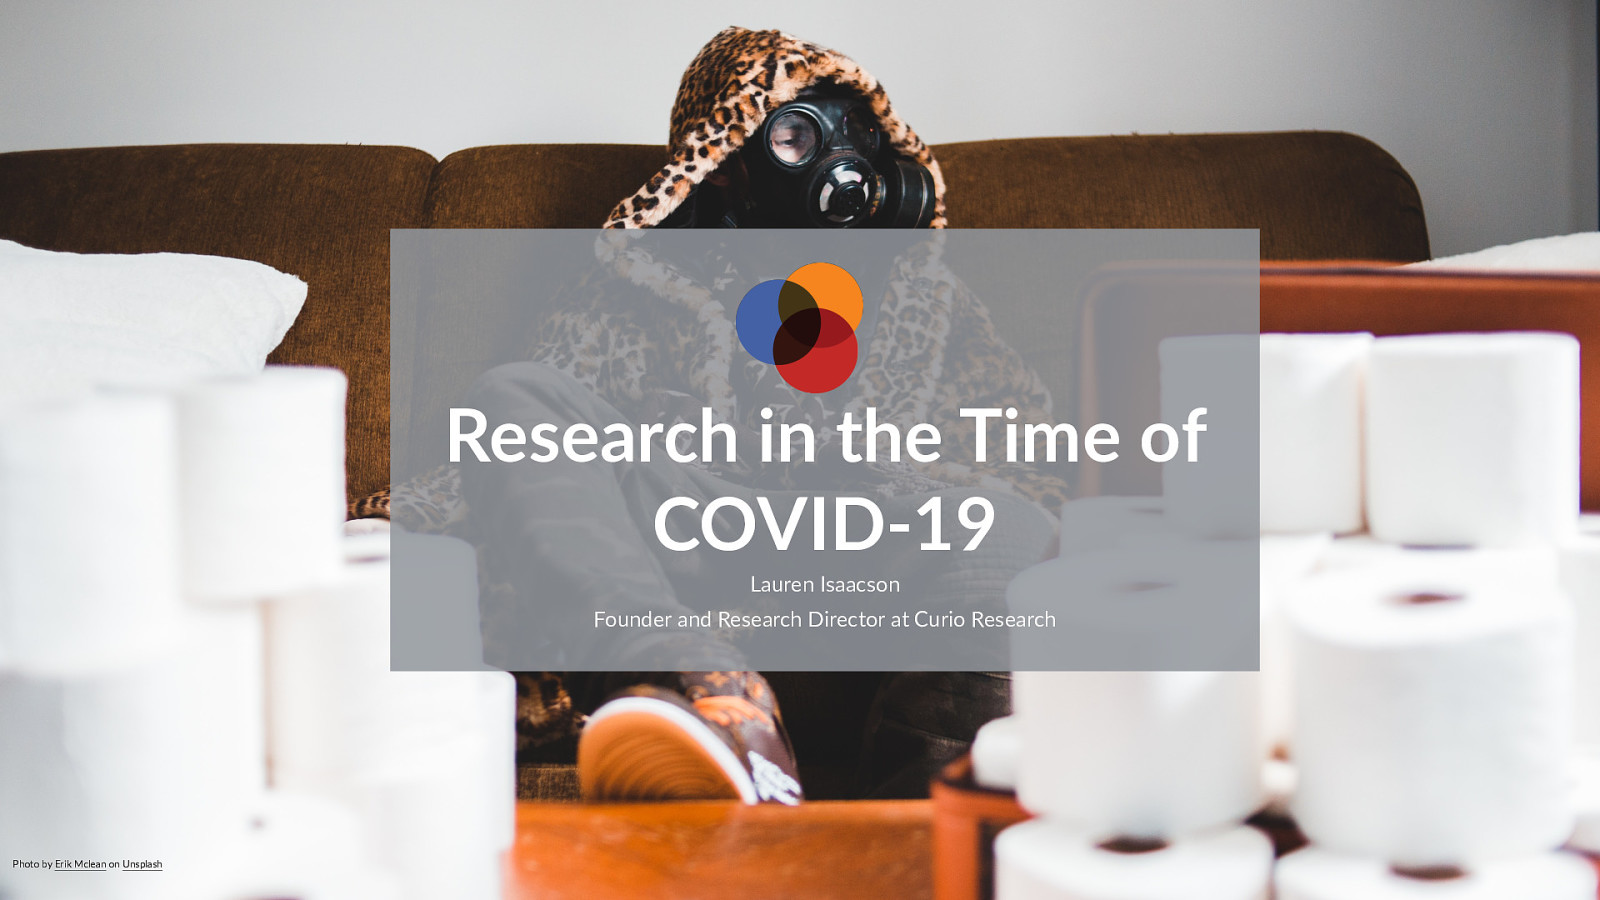 Research in the time of COVID-19